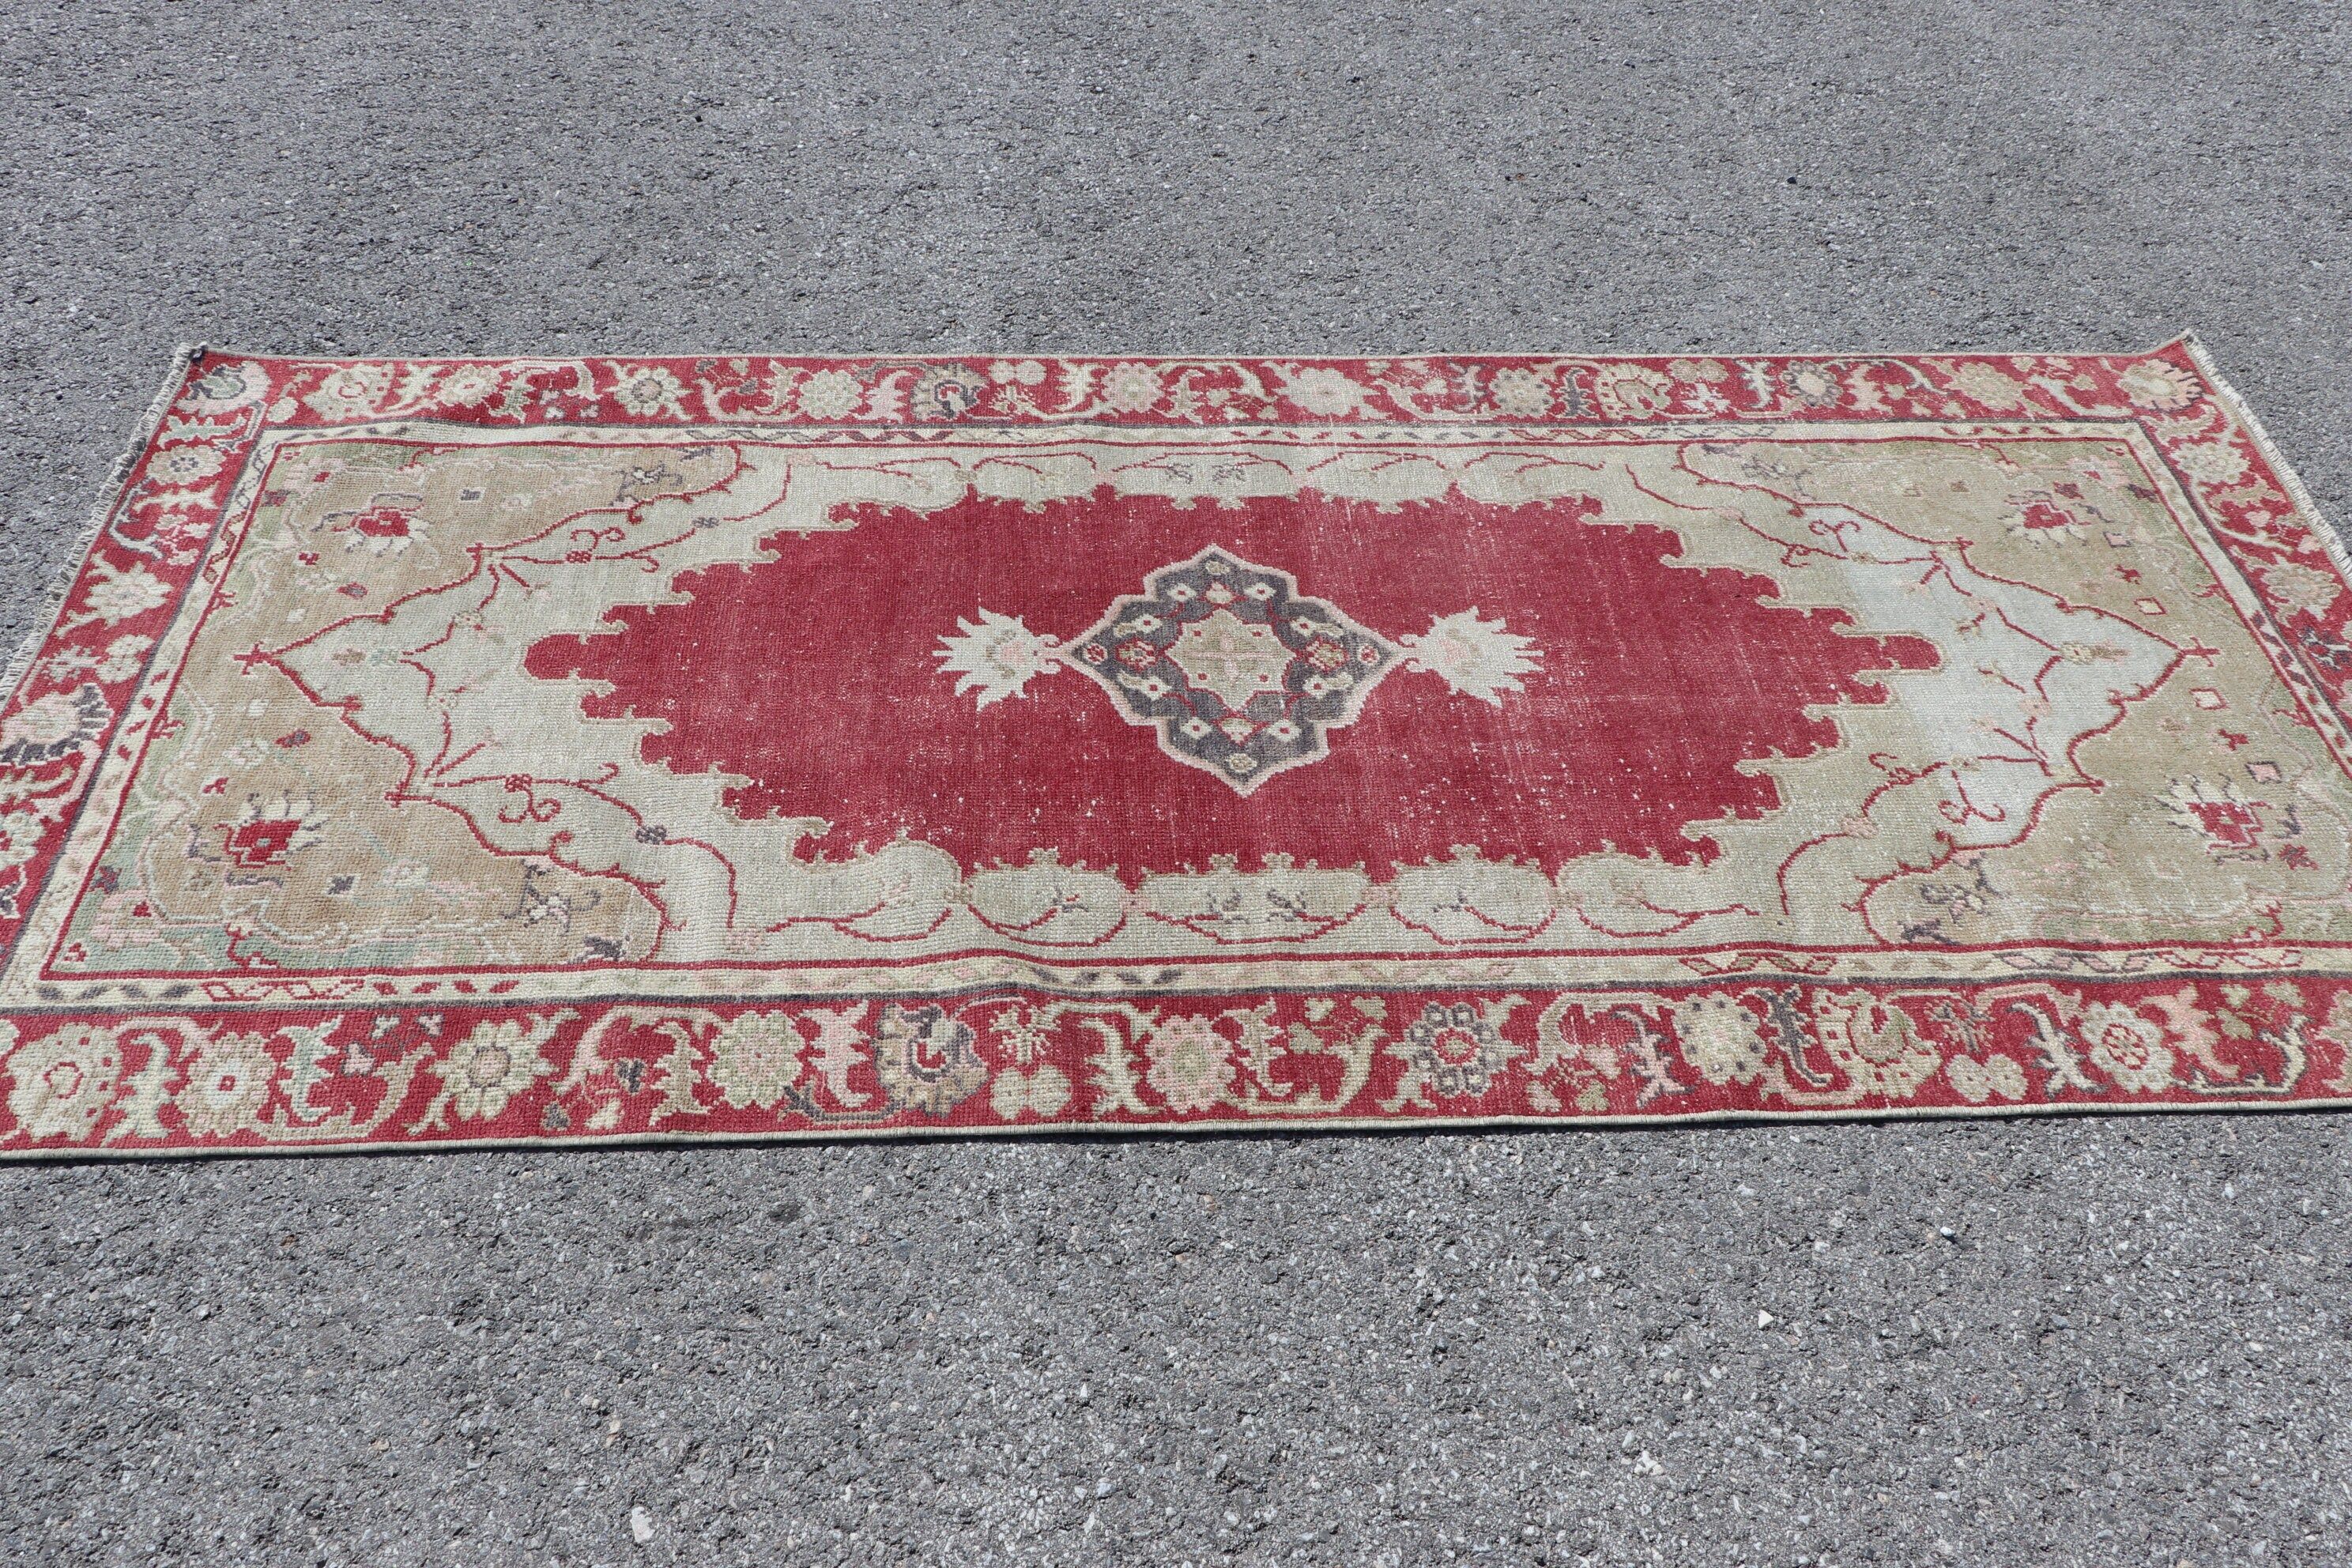 Turkish Rugs, Oushak Rug, Retro Rugs, Vintage Rugs, Red Antique Rug, 3.6x7.9 ft Area Rugs, Rugs for Dining Room, Indoor Rugs, Antique Rugs